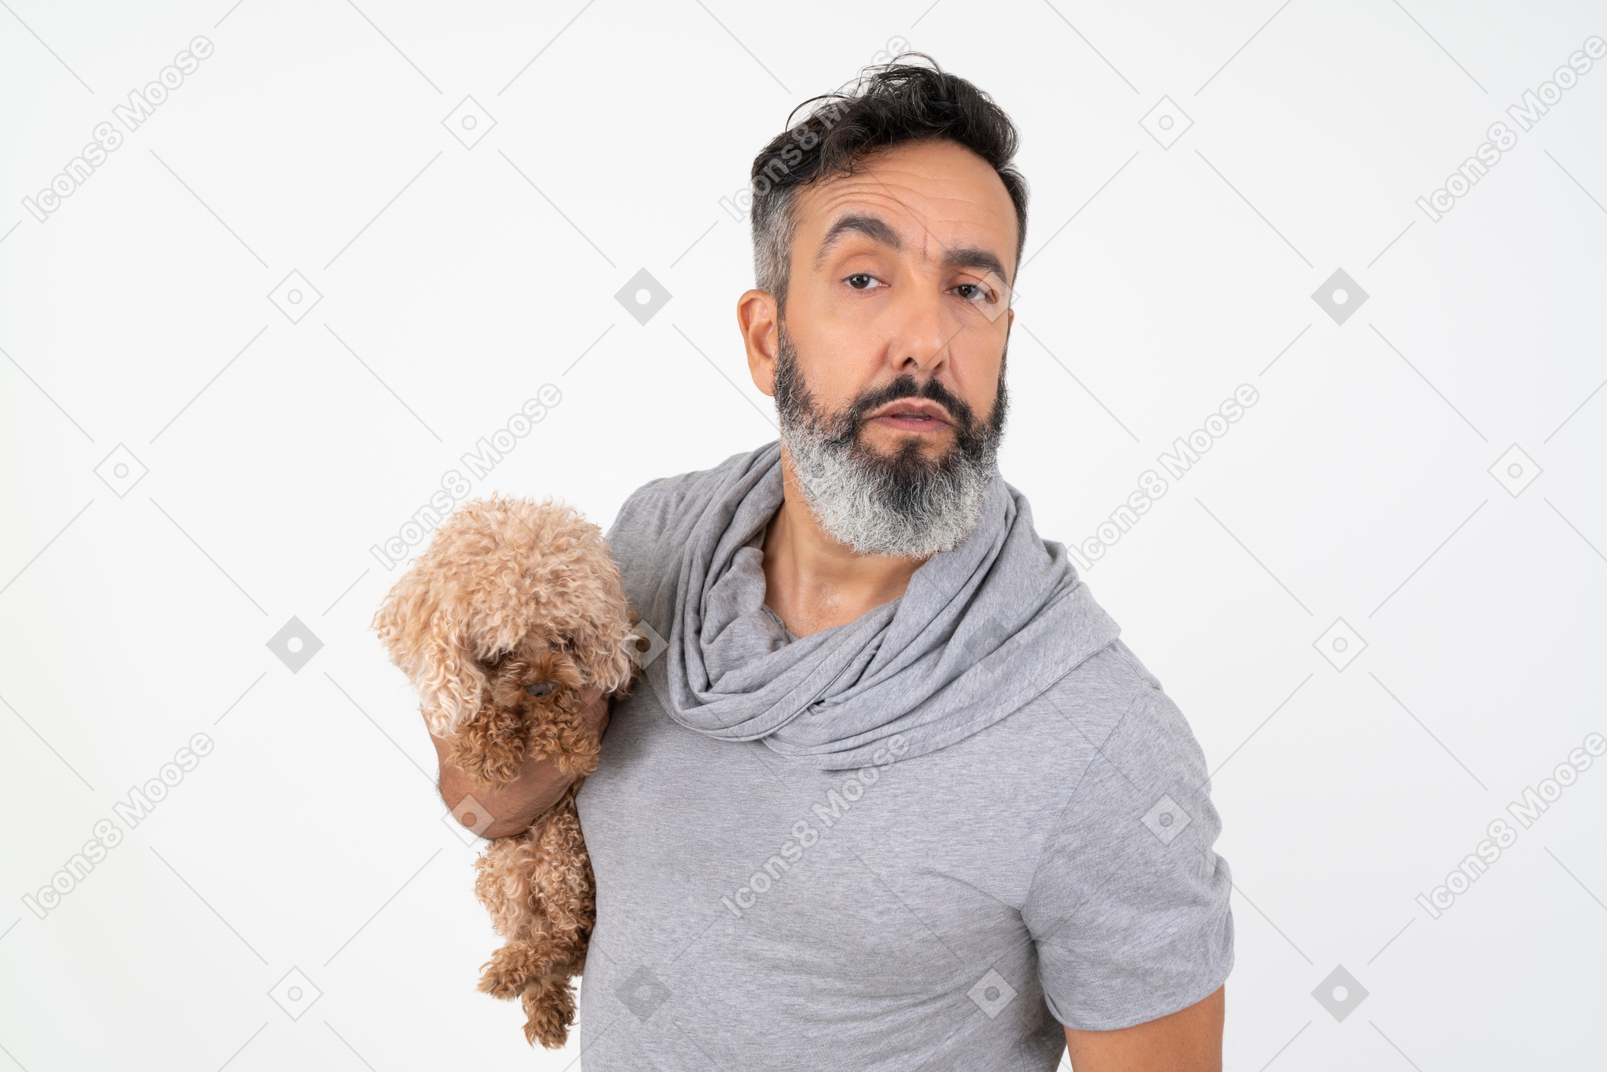 Handsome man holding a puppy